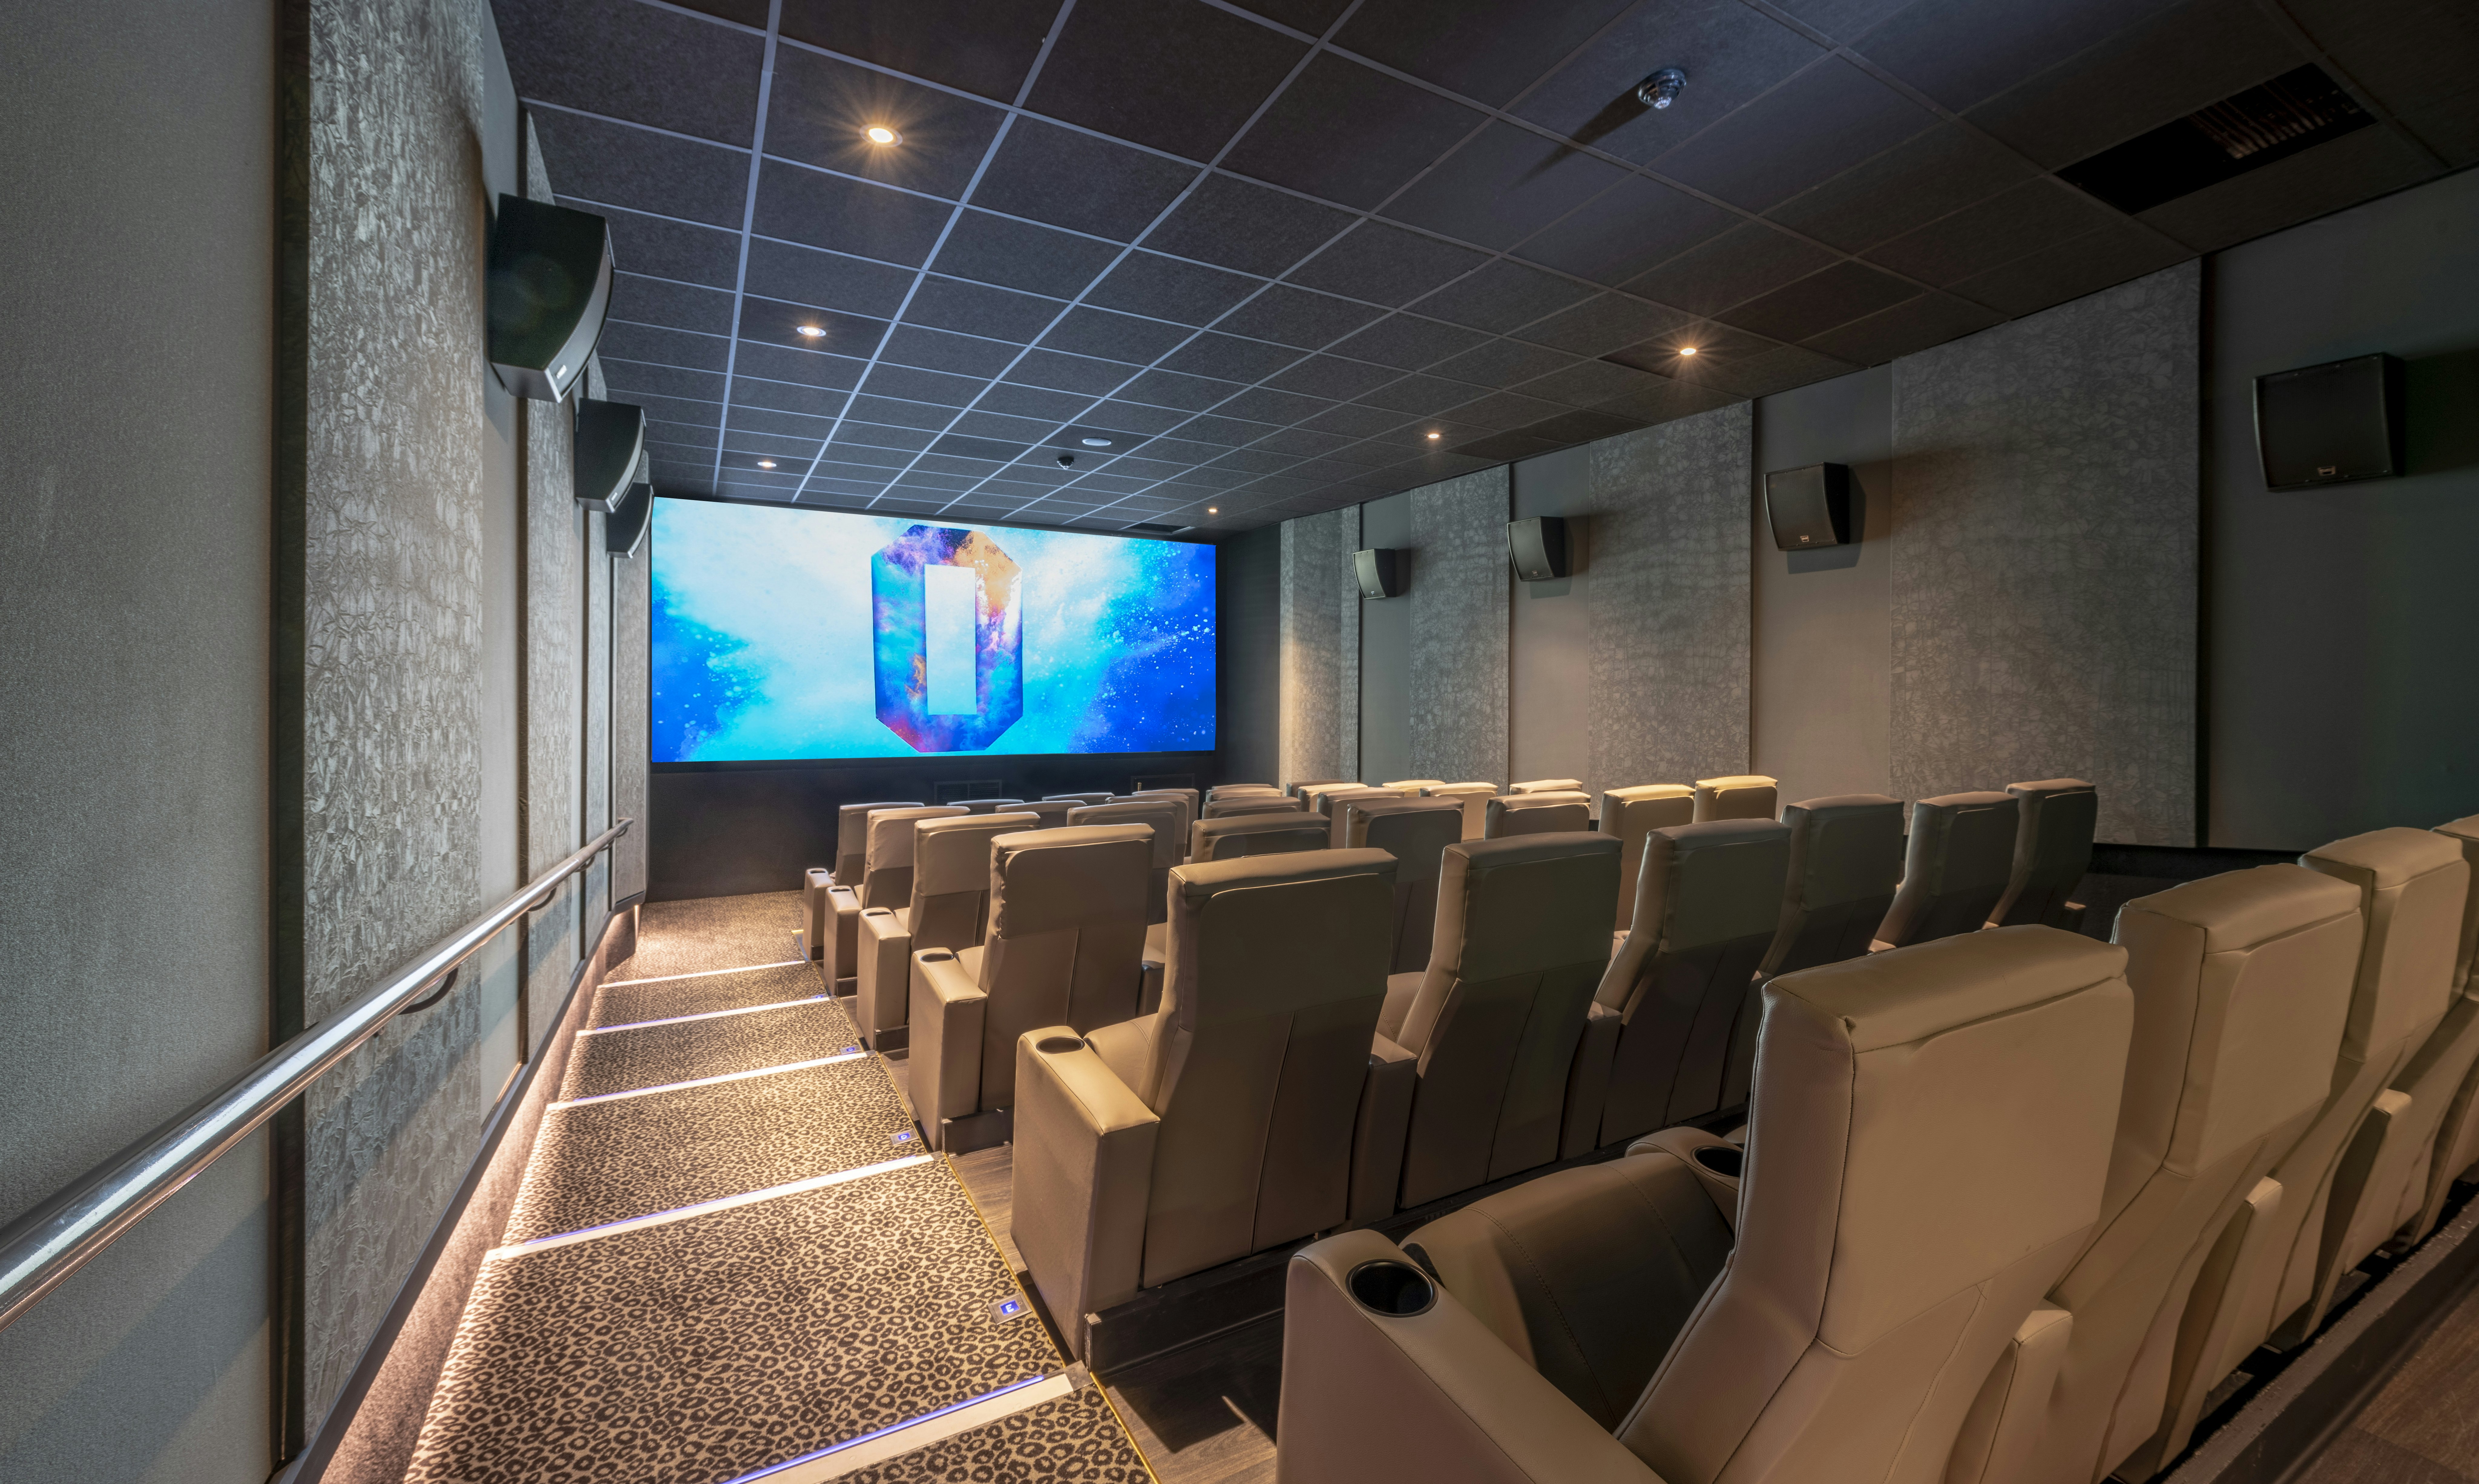 Historic Venues in London - ODEON LUXE Leicester Square  